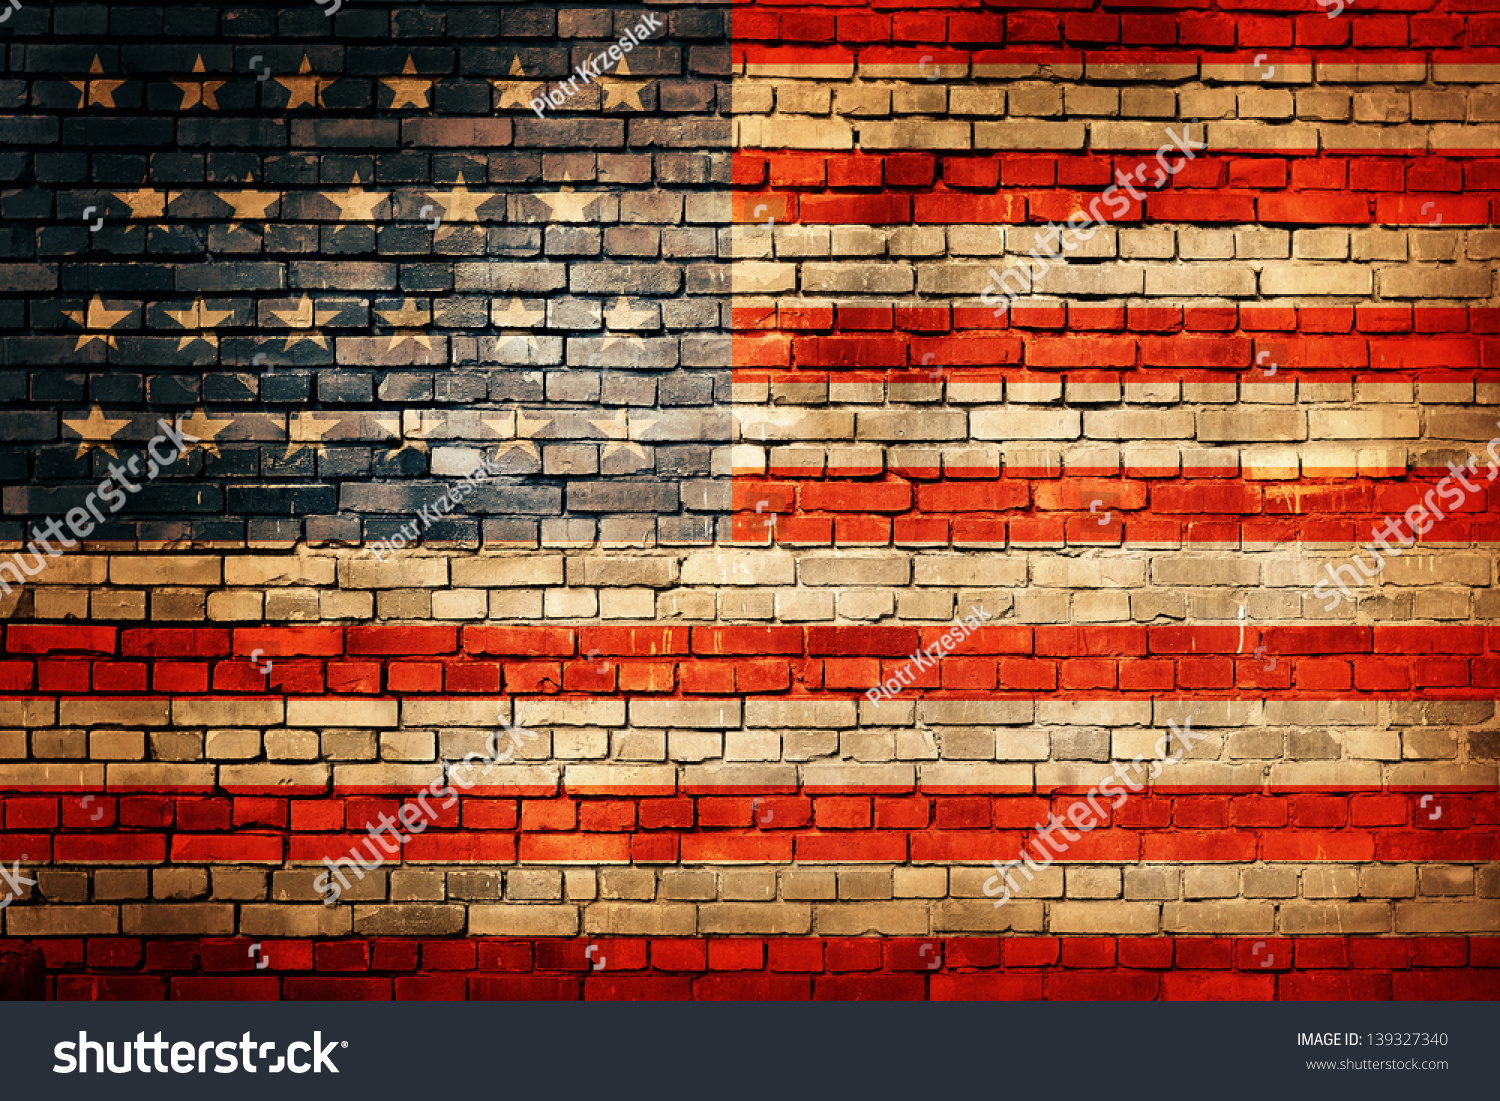 Usa Flag On Old Brick Wall Stock Photo 139327340 Shutterstock